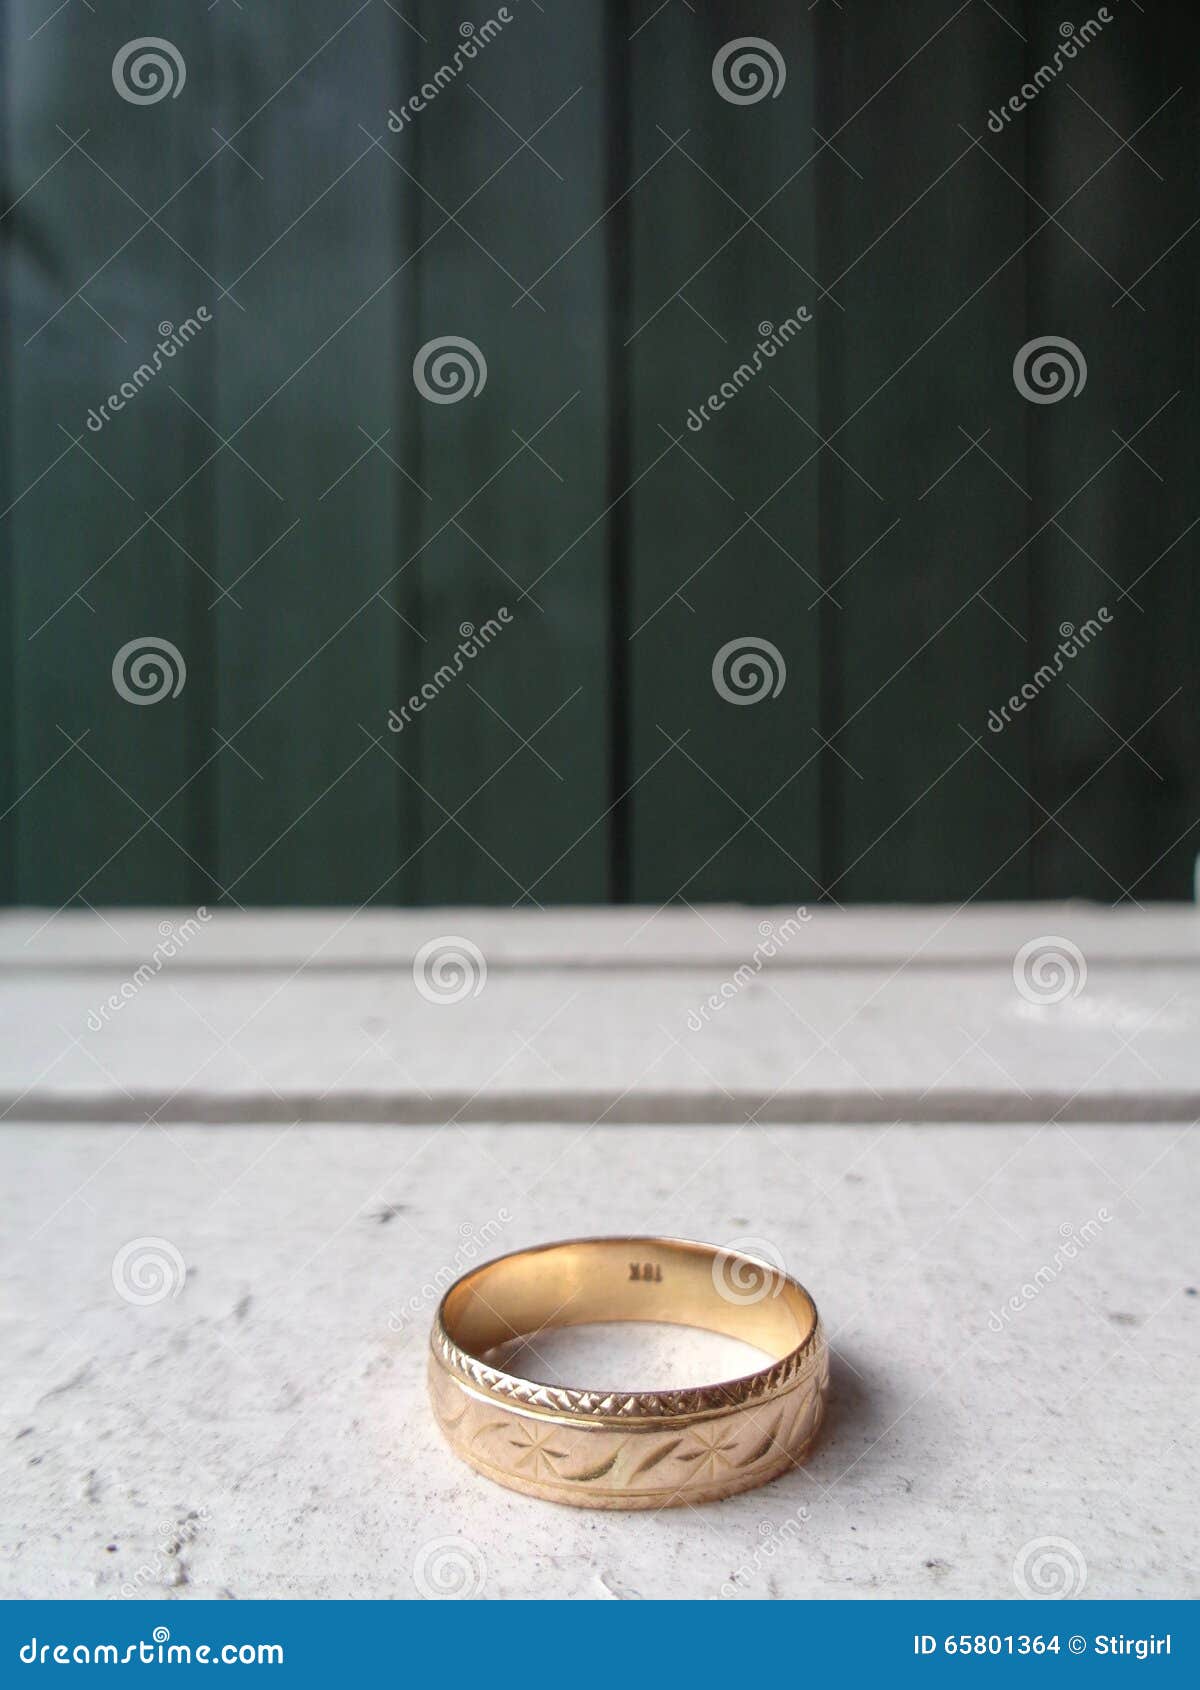 Embellished Gold Ring Band on White Crate Stock Photo - Image of crate ...